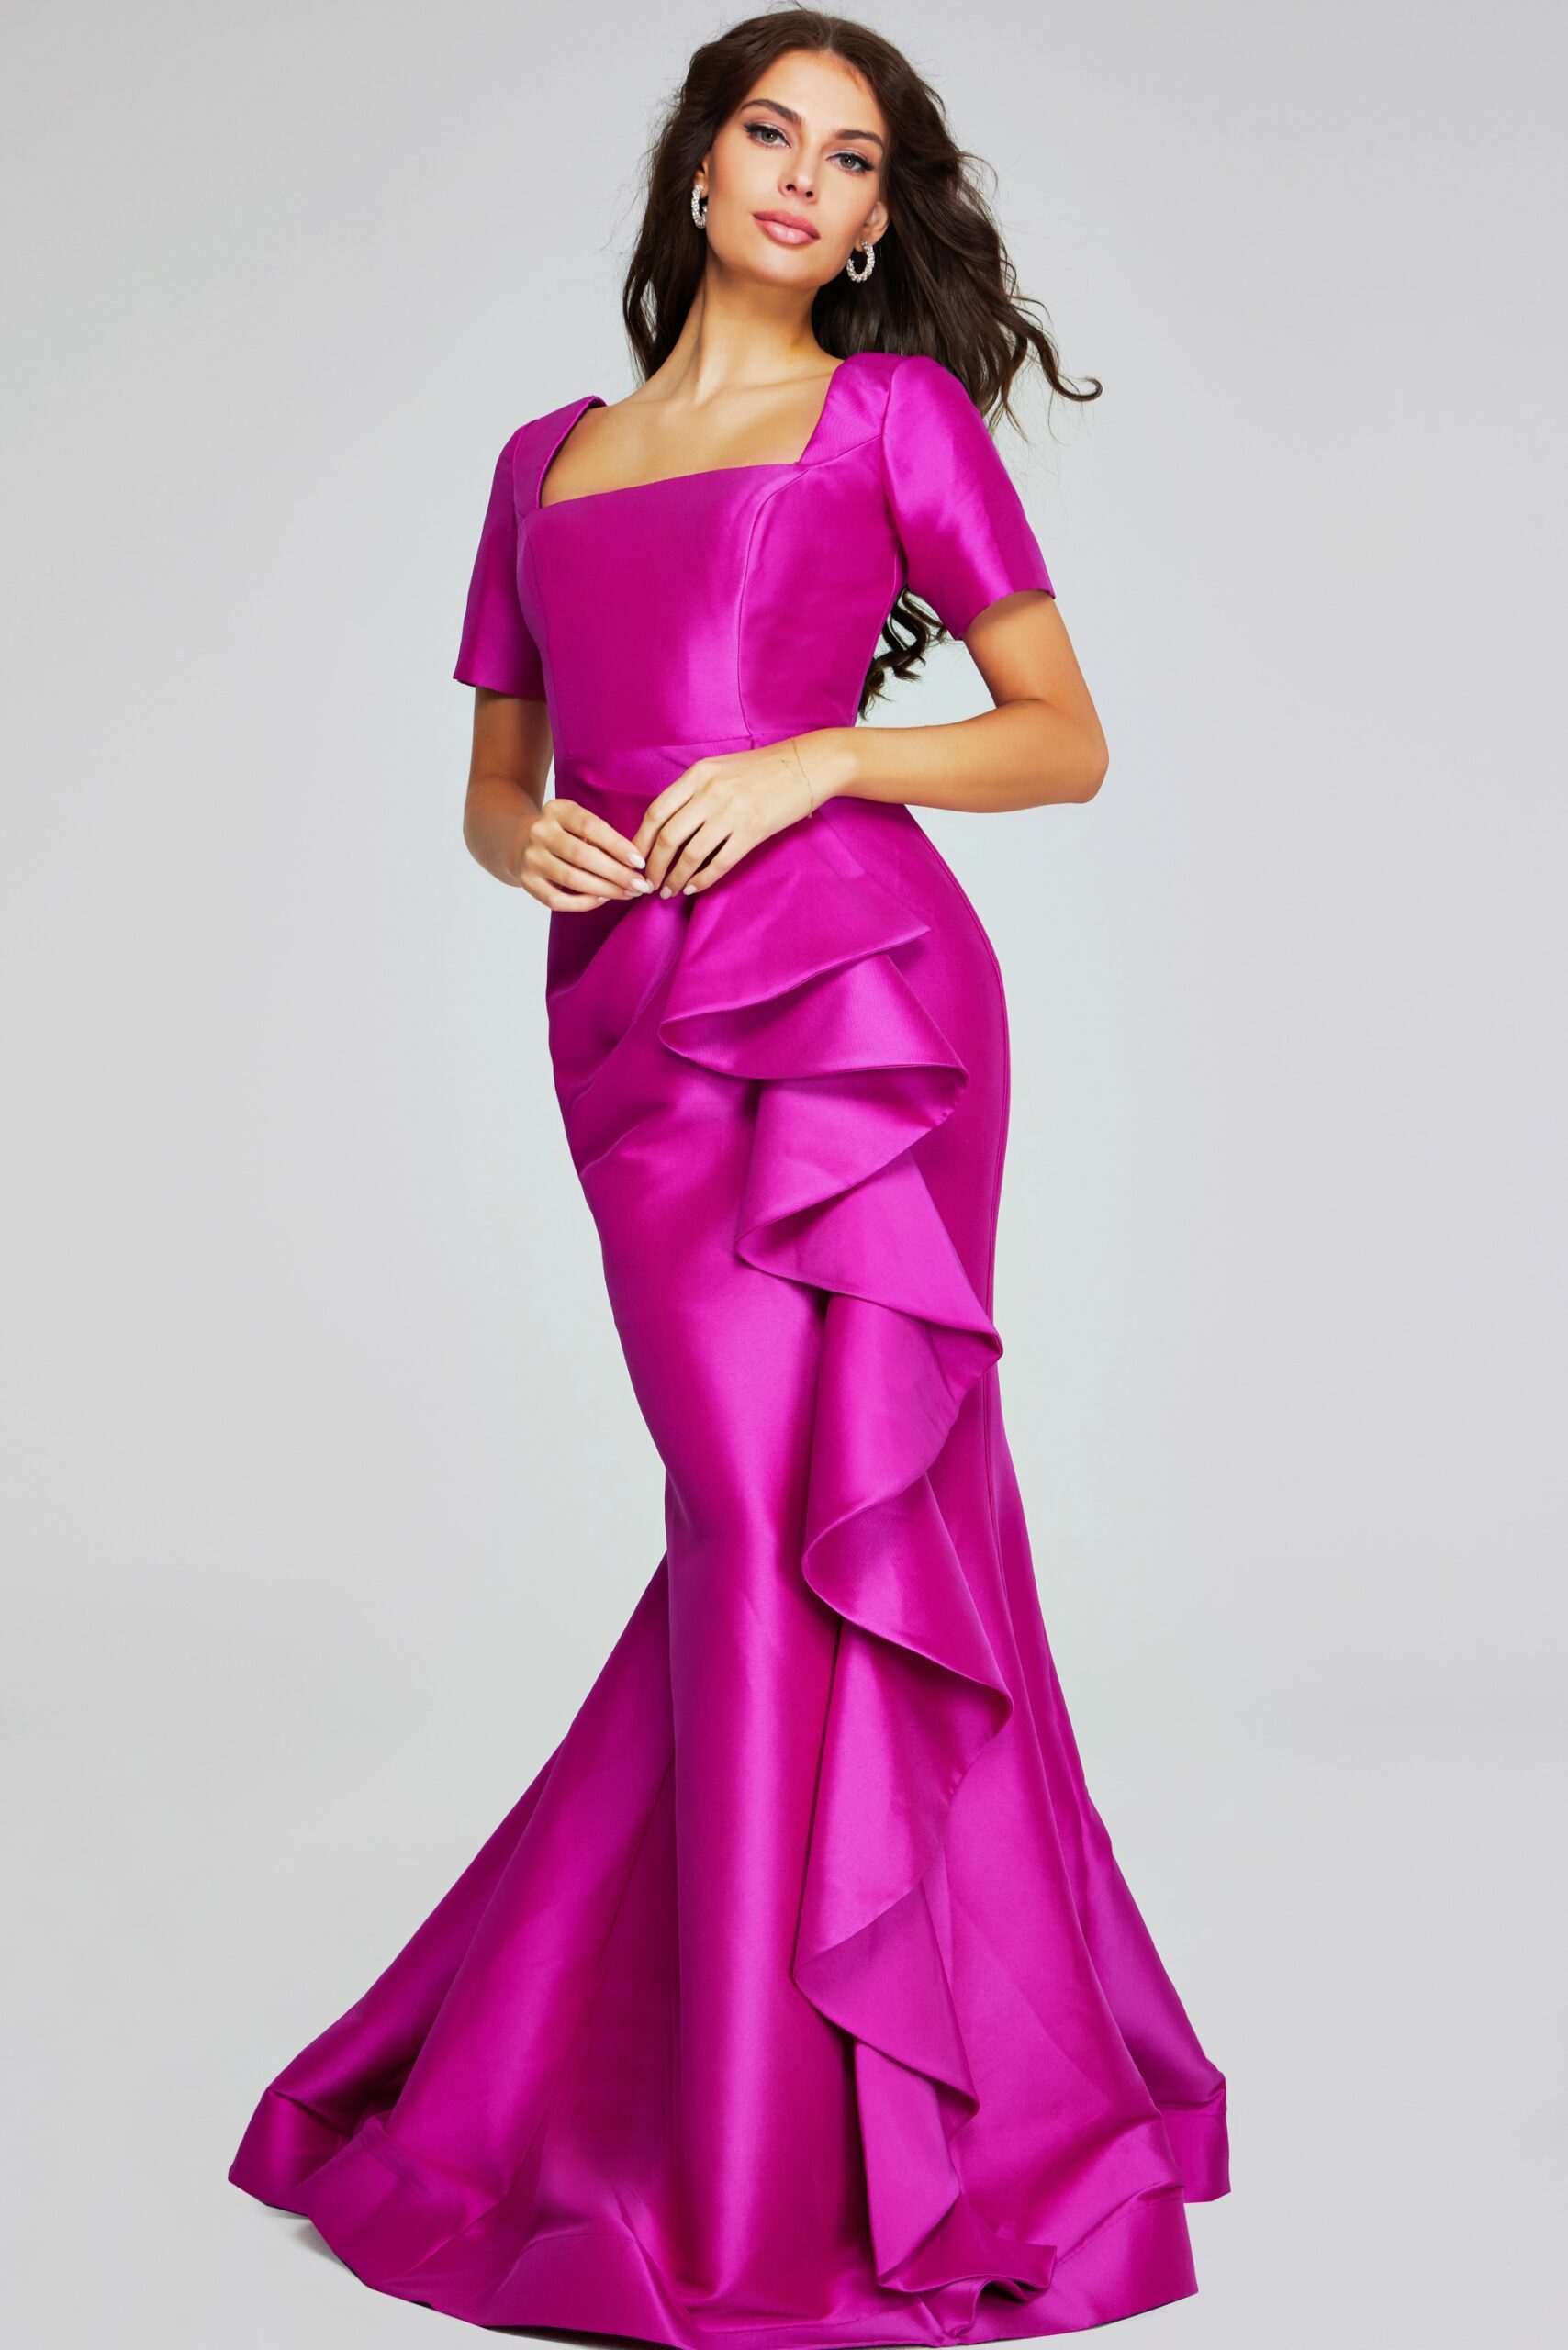 Vibrant Orchid Gown with Square Neckline and Ruffle Detail 41128